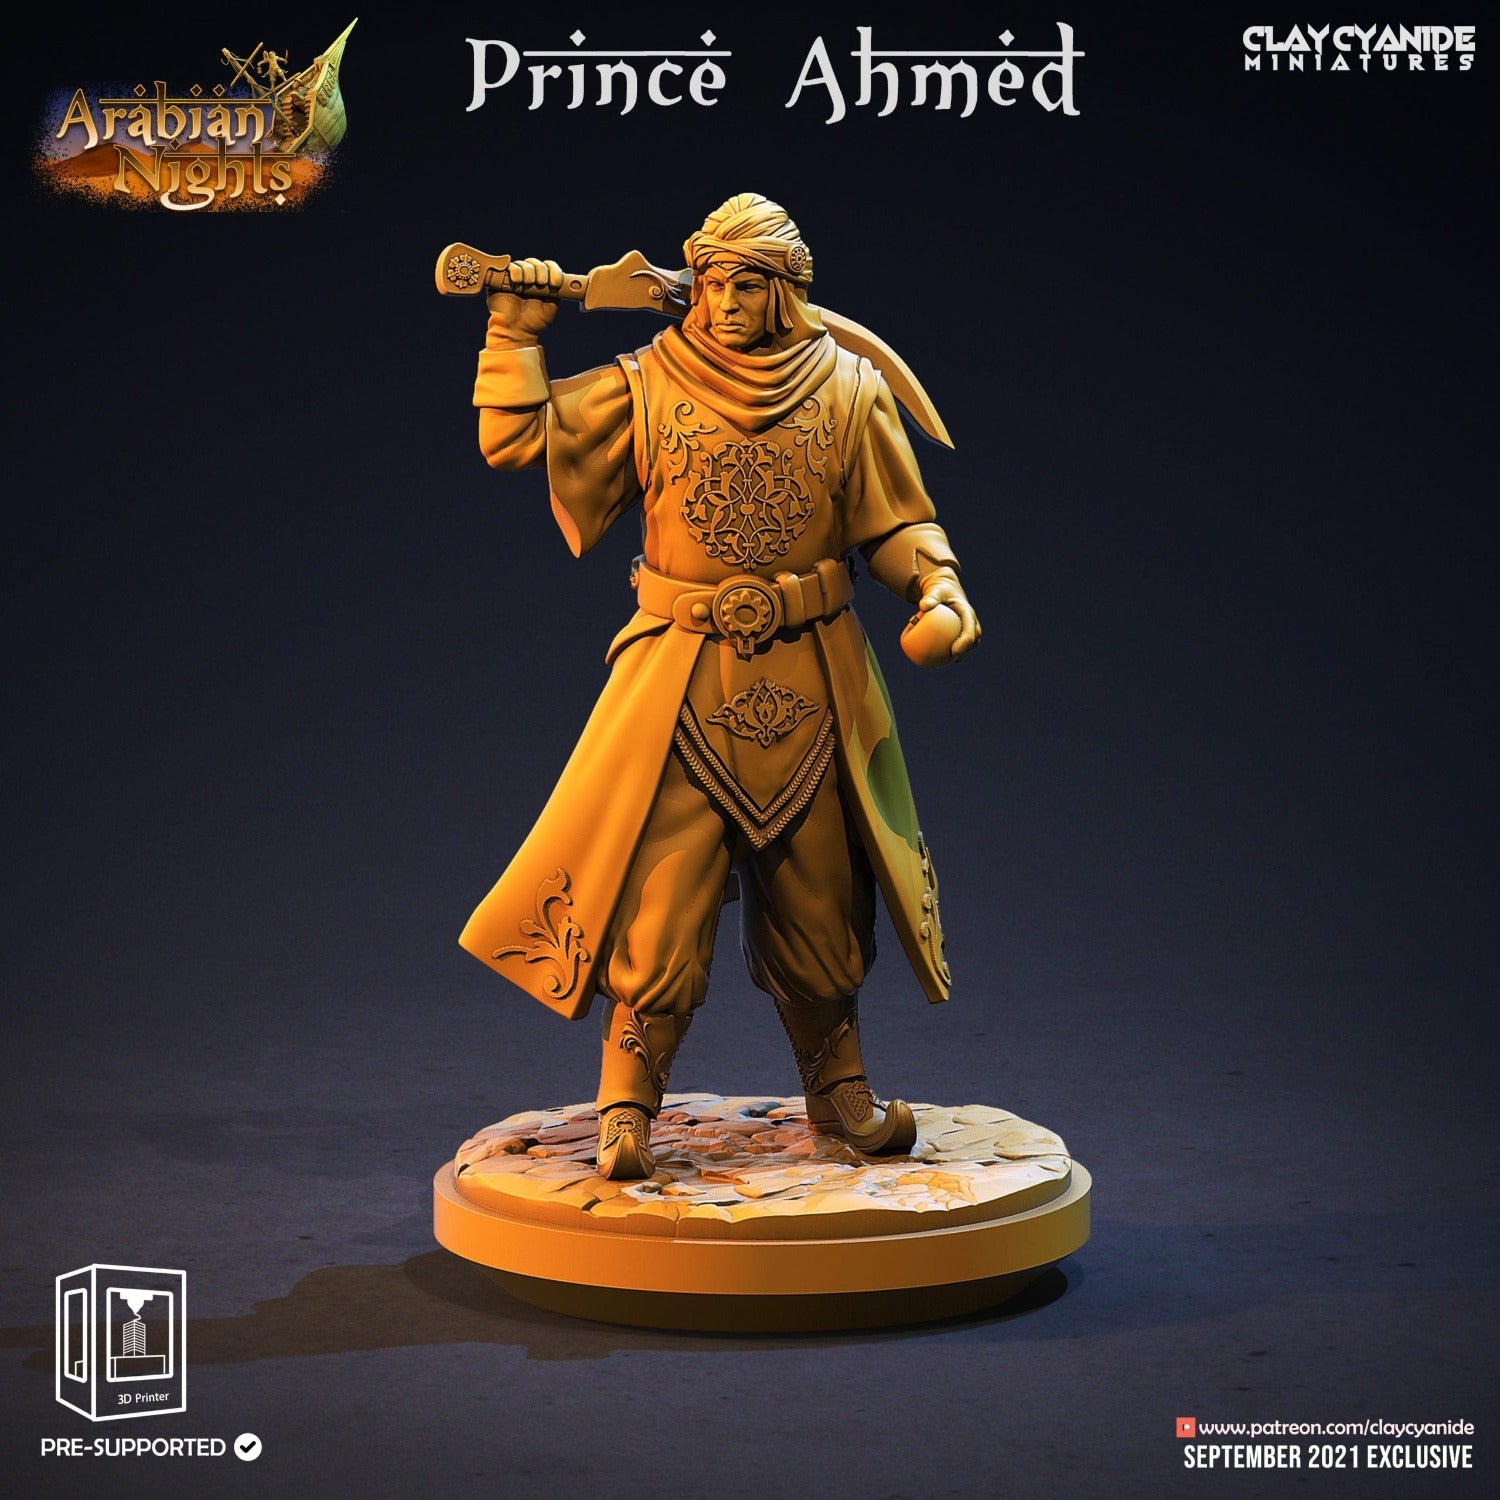 Prince of the Indies - Prince Ahmed